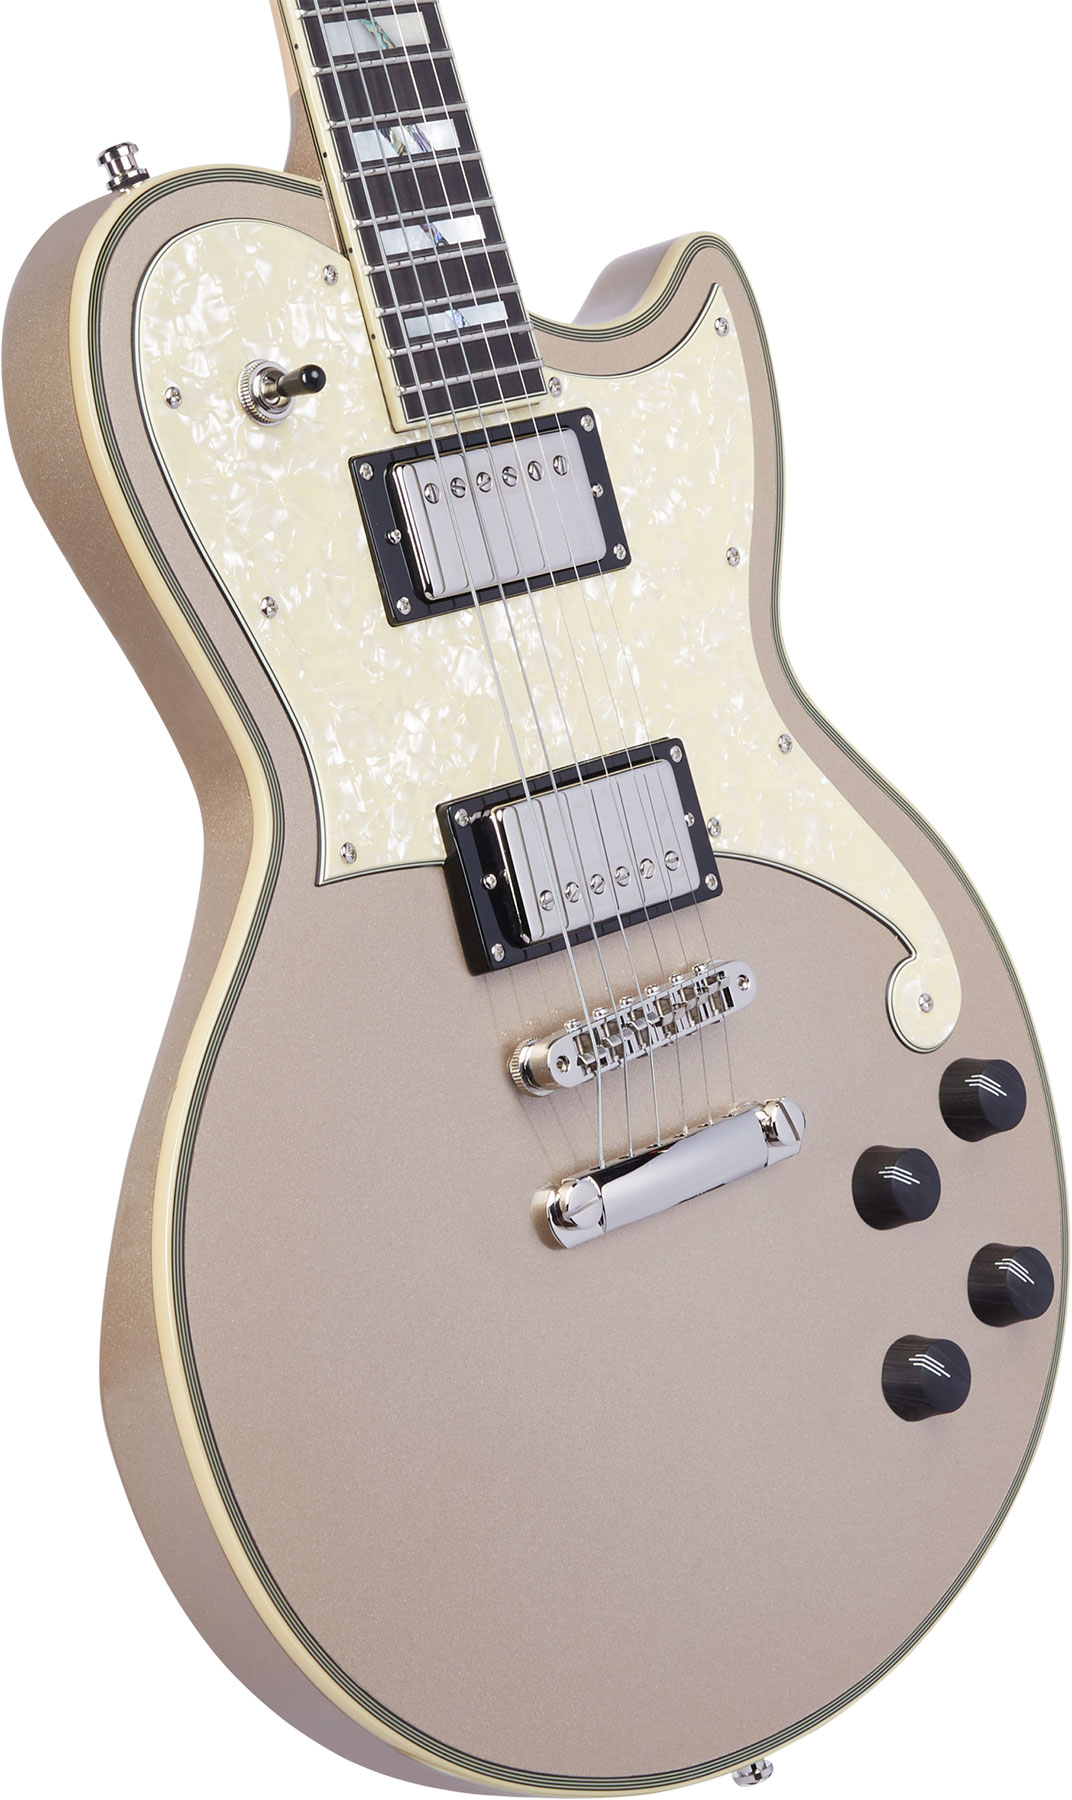 D'angelico Deluxe Atlantic 2h Ht Eb - Desert Gold - Single cut electric guitar - Variation 3